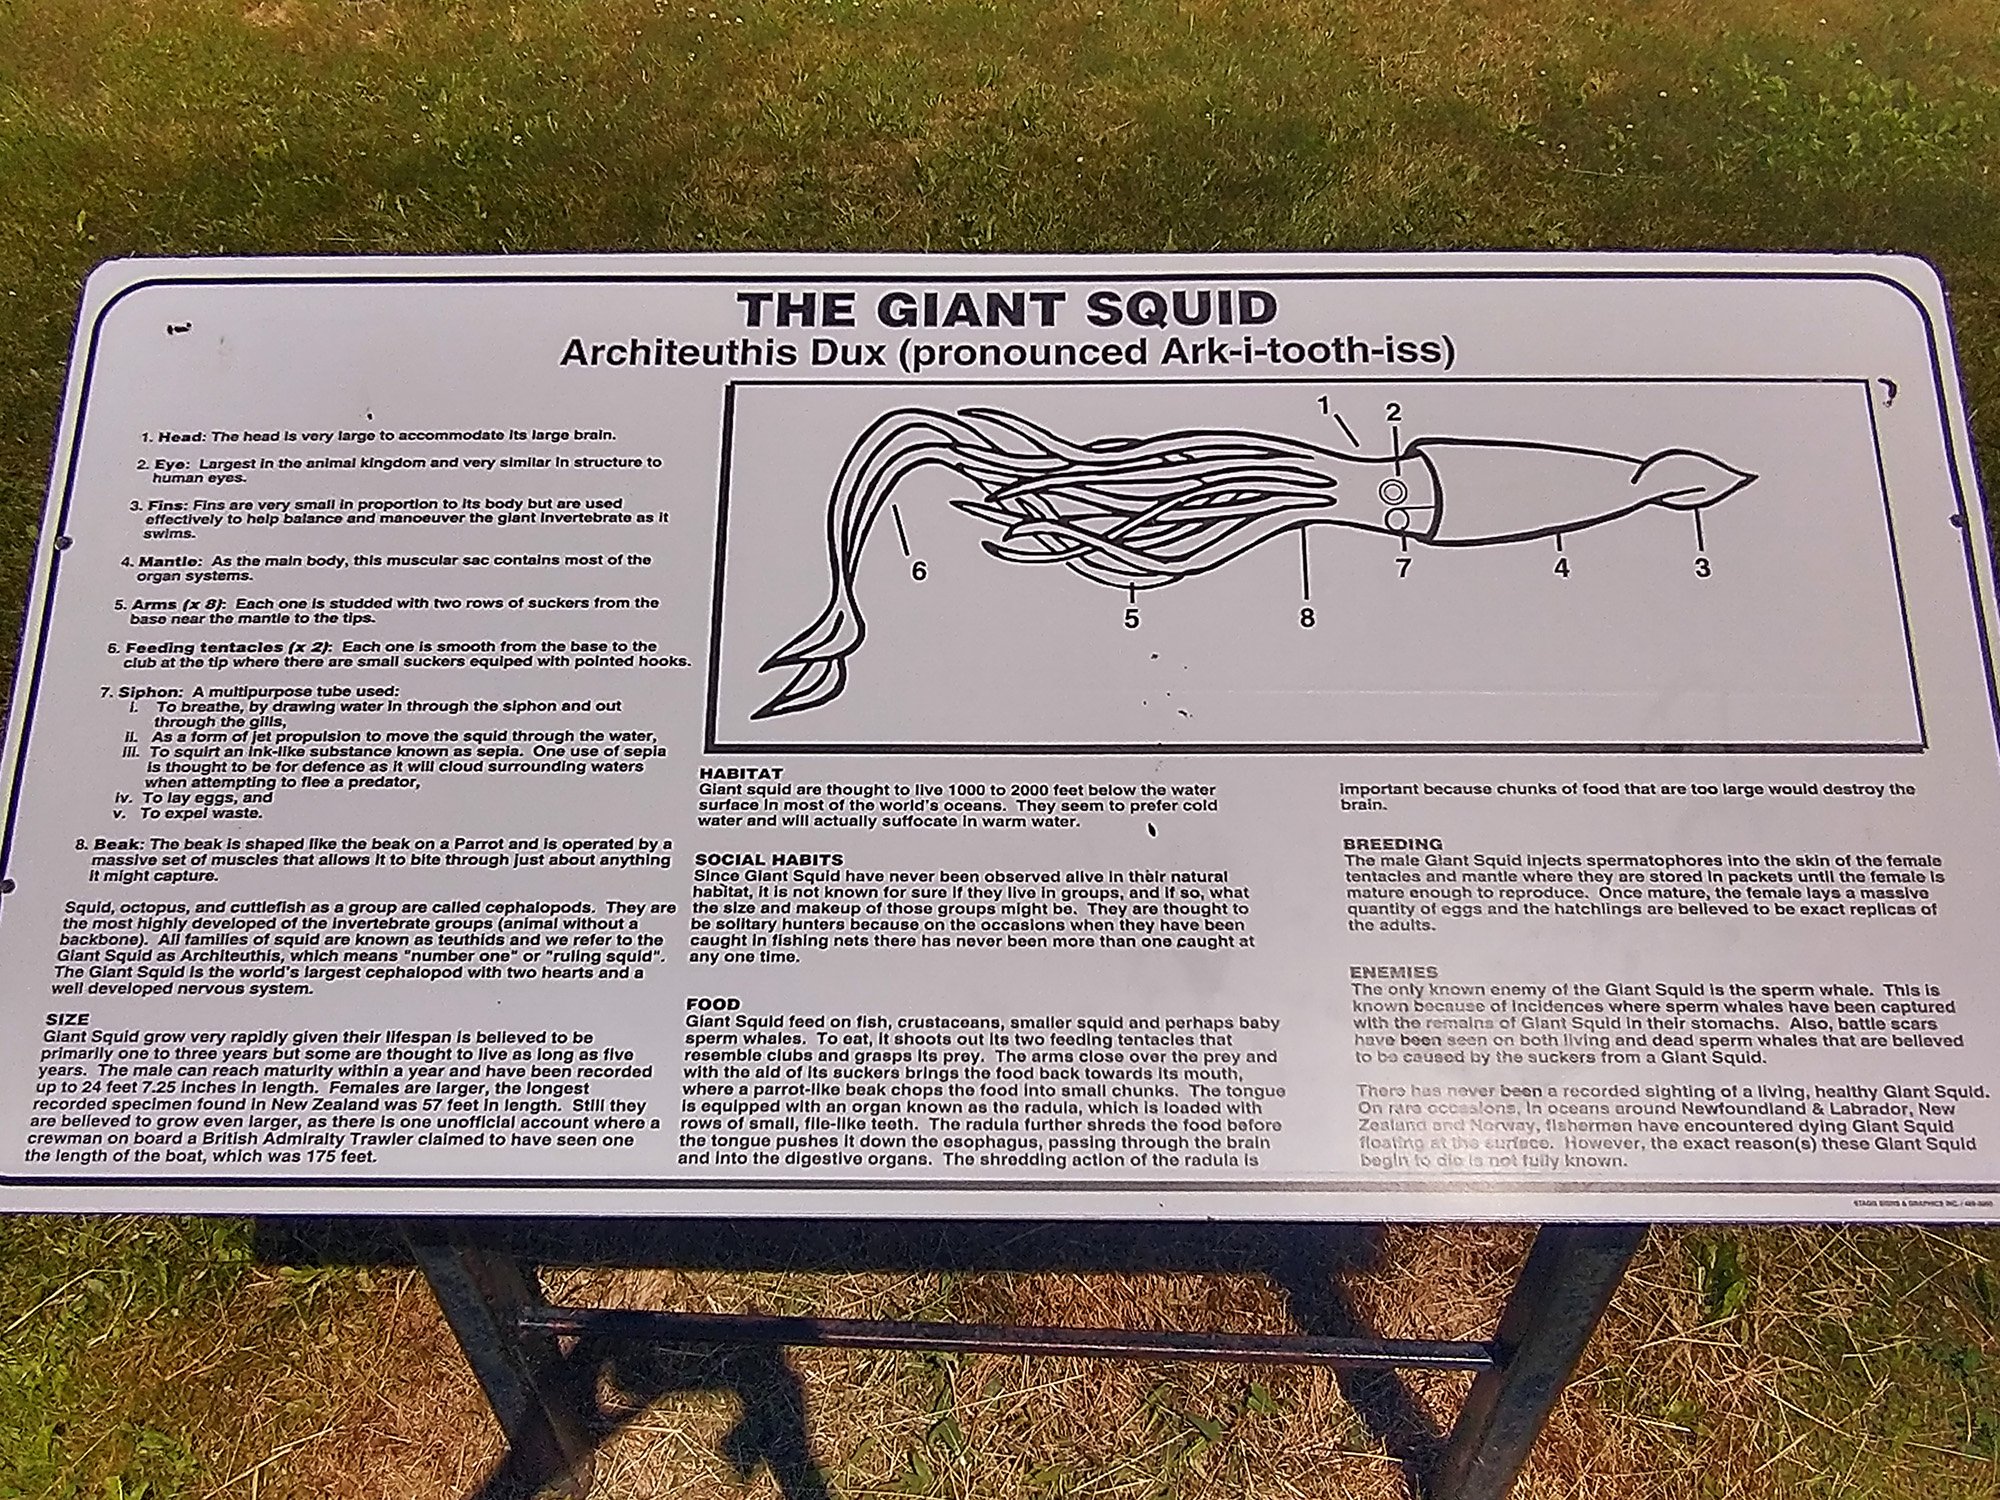 Here you go, learn about squids.